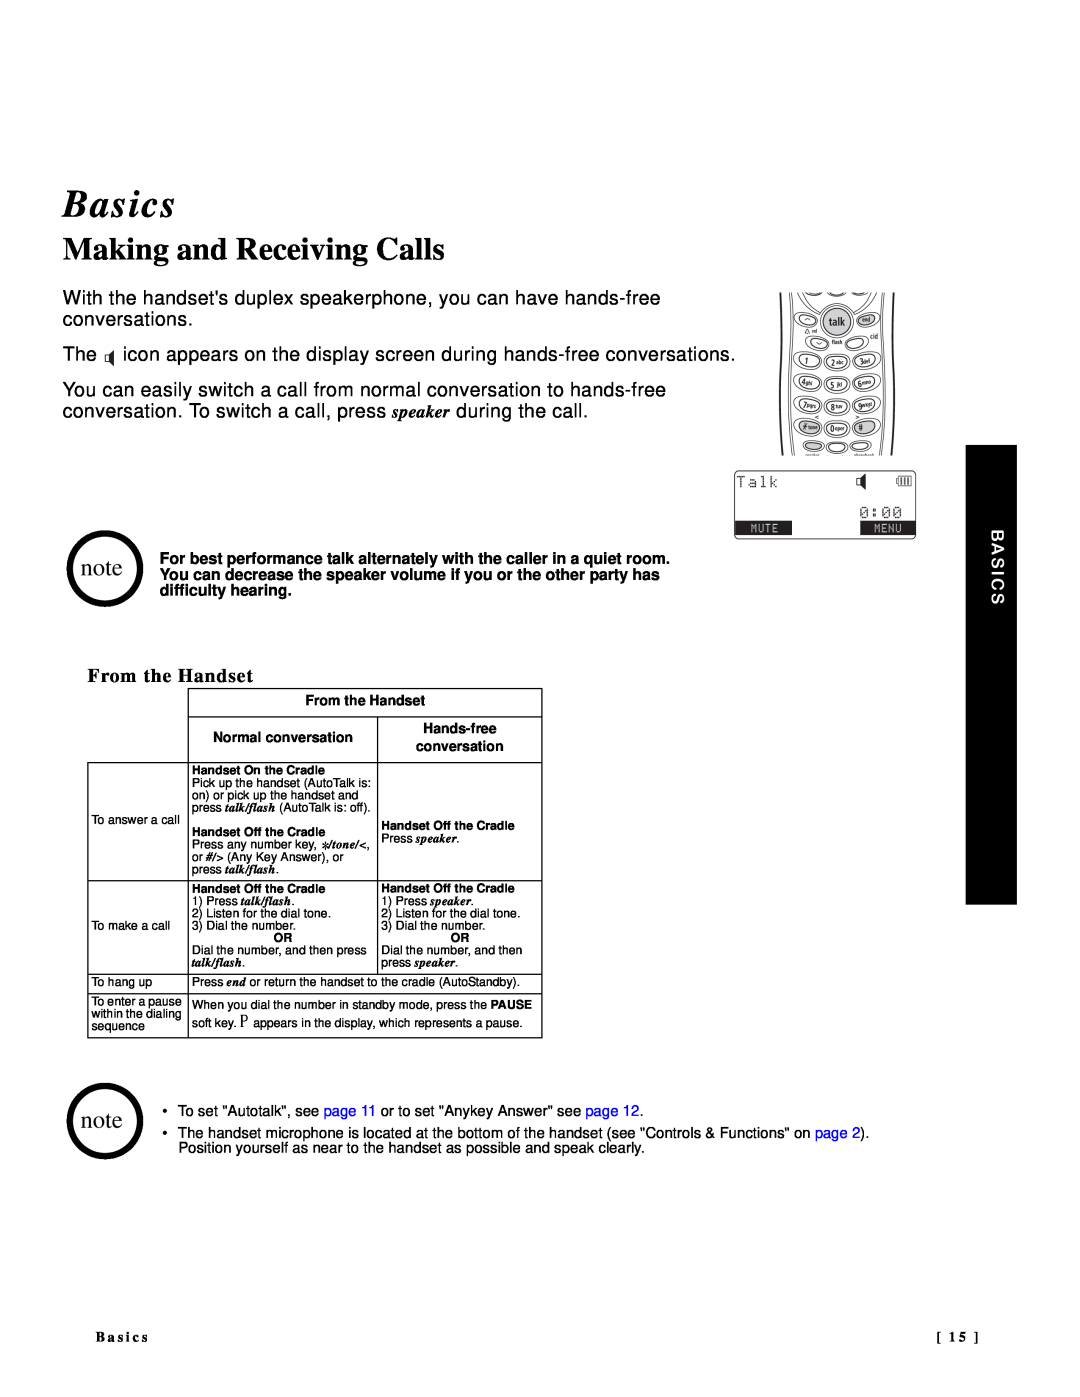 NEC DTR-IR-2 user manual Basics, Making and Receiving Calls, From the Handset 